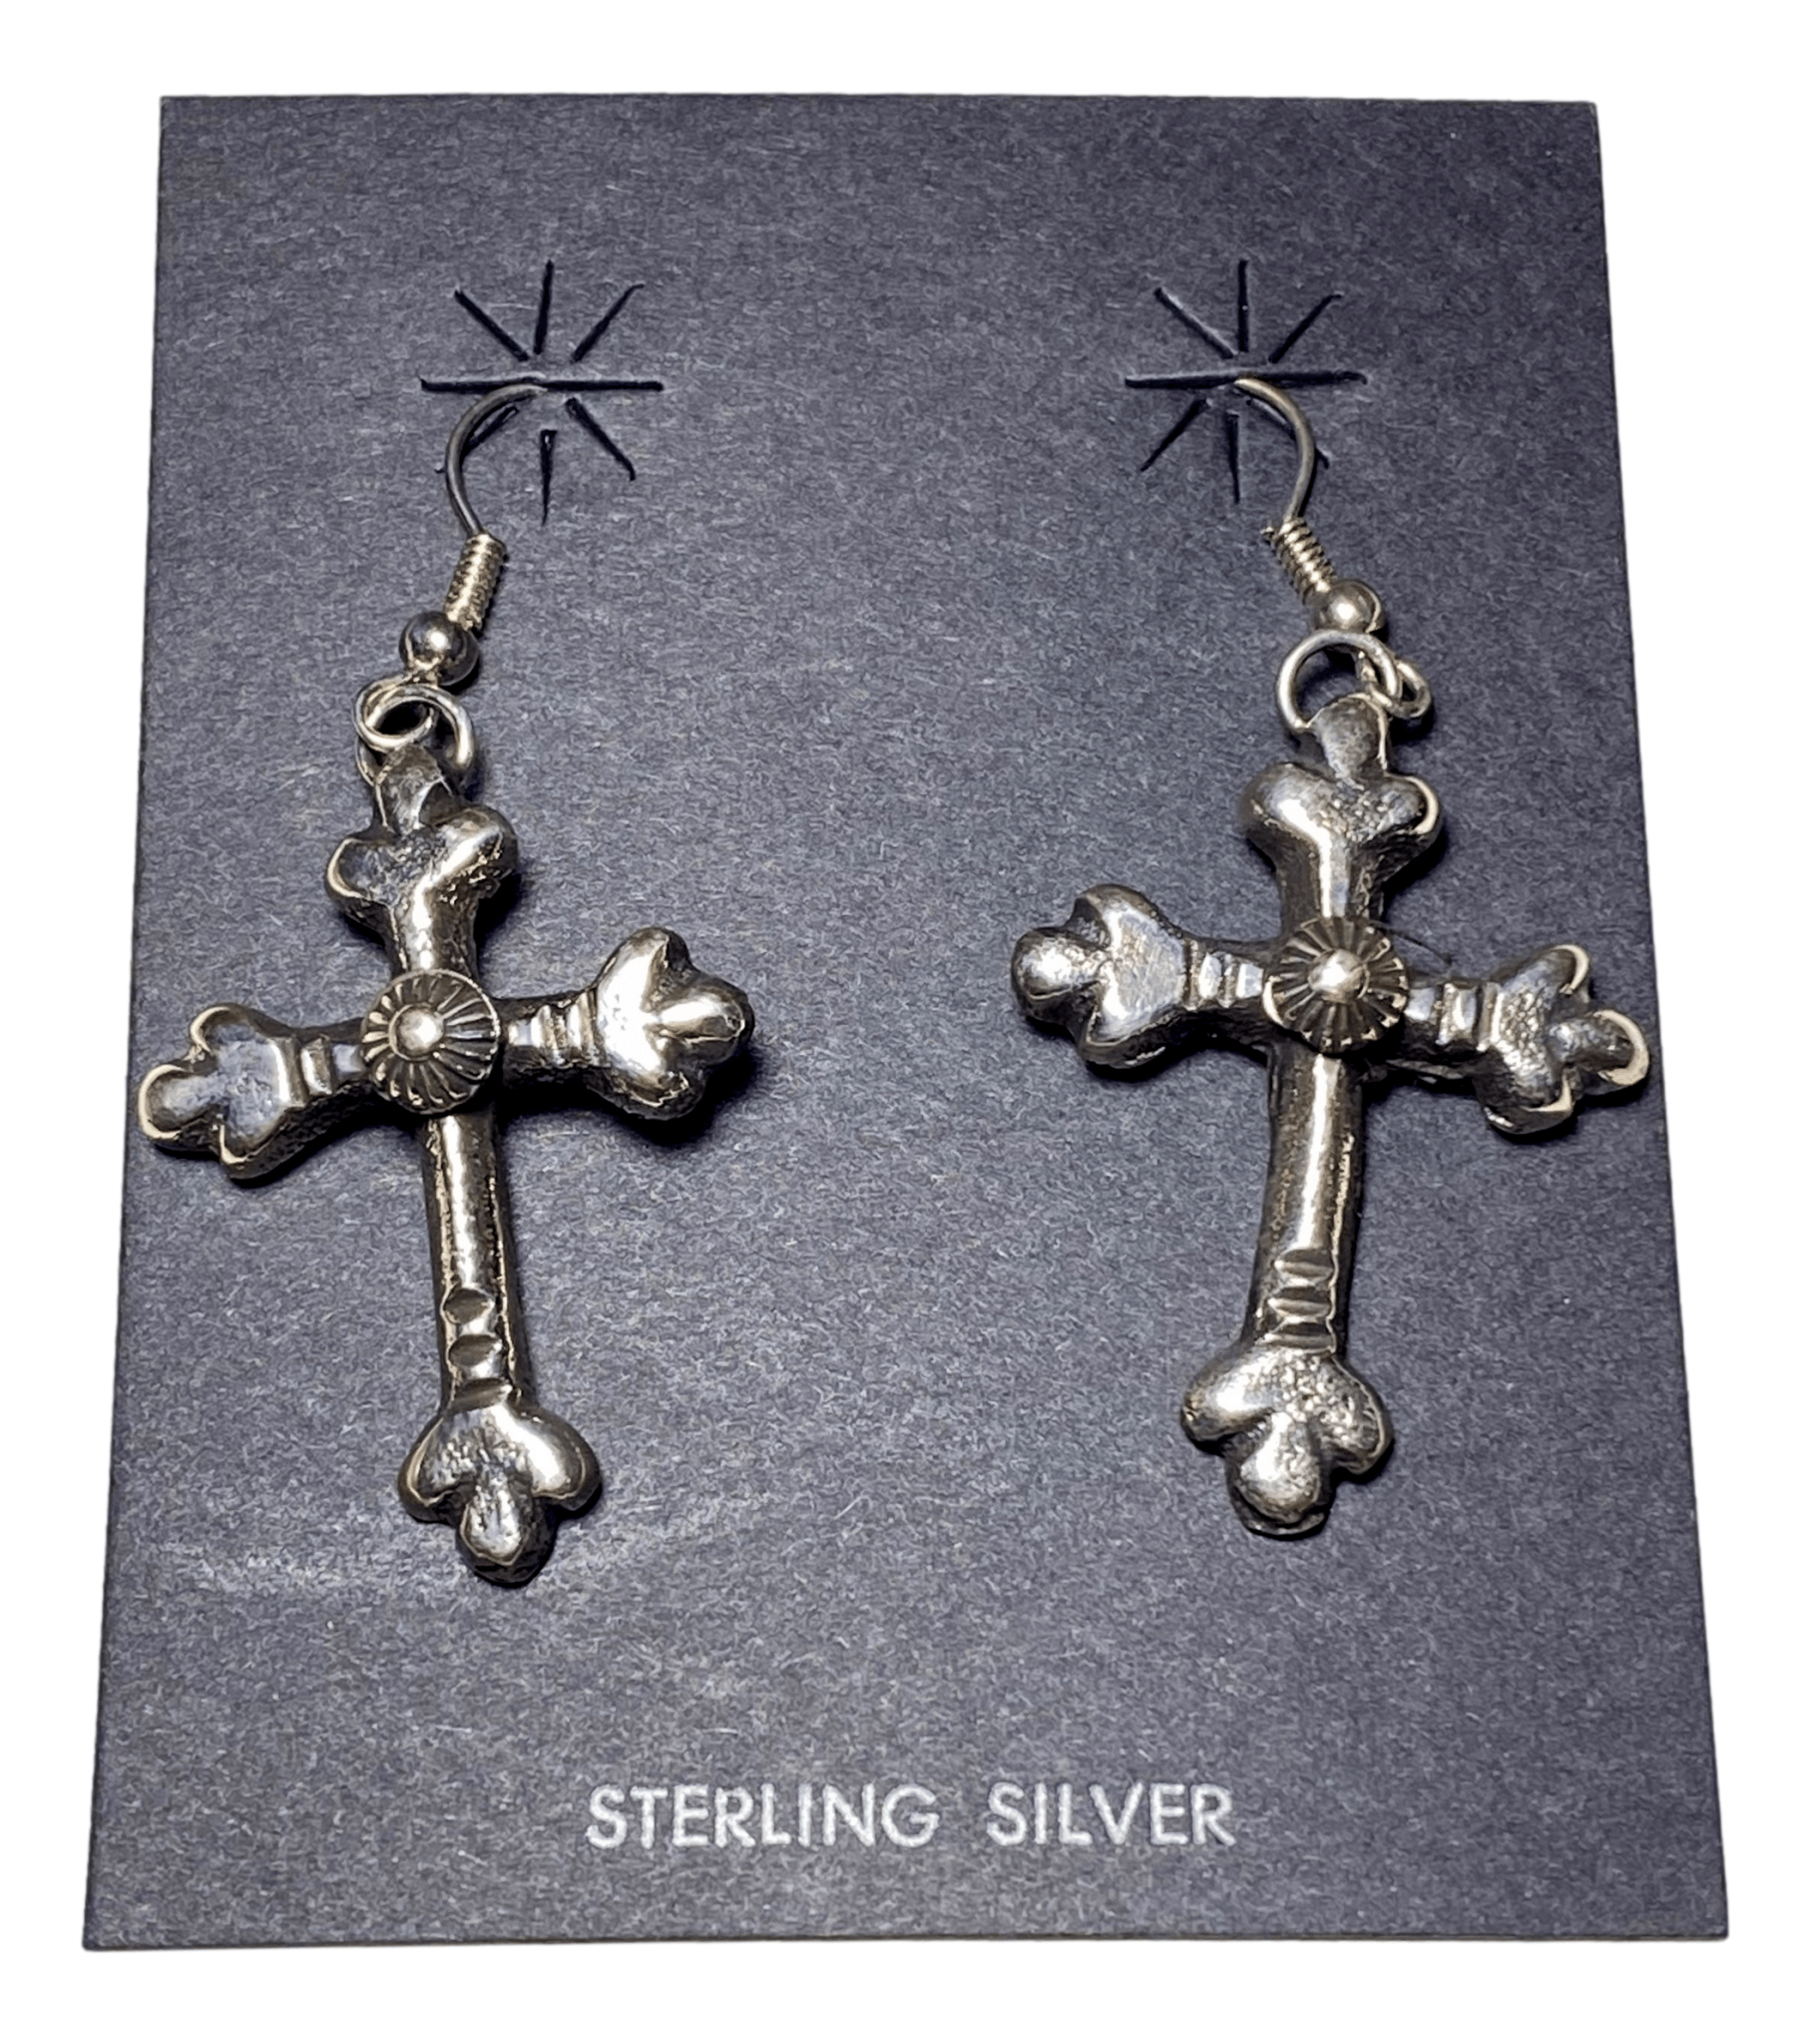 Earrings Dangle Sterling Silver Cross Concho Center Flower Ends Handcrafted by Native American Artisan 2 L x 1 W inches - Ysleta Mission Gift Shop- VOTED El Paso's Best Gift Shop